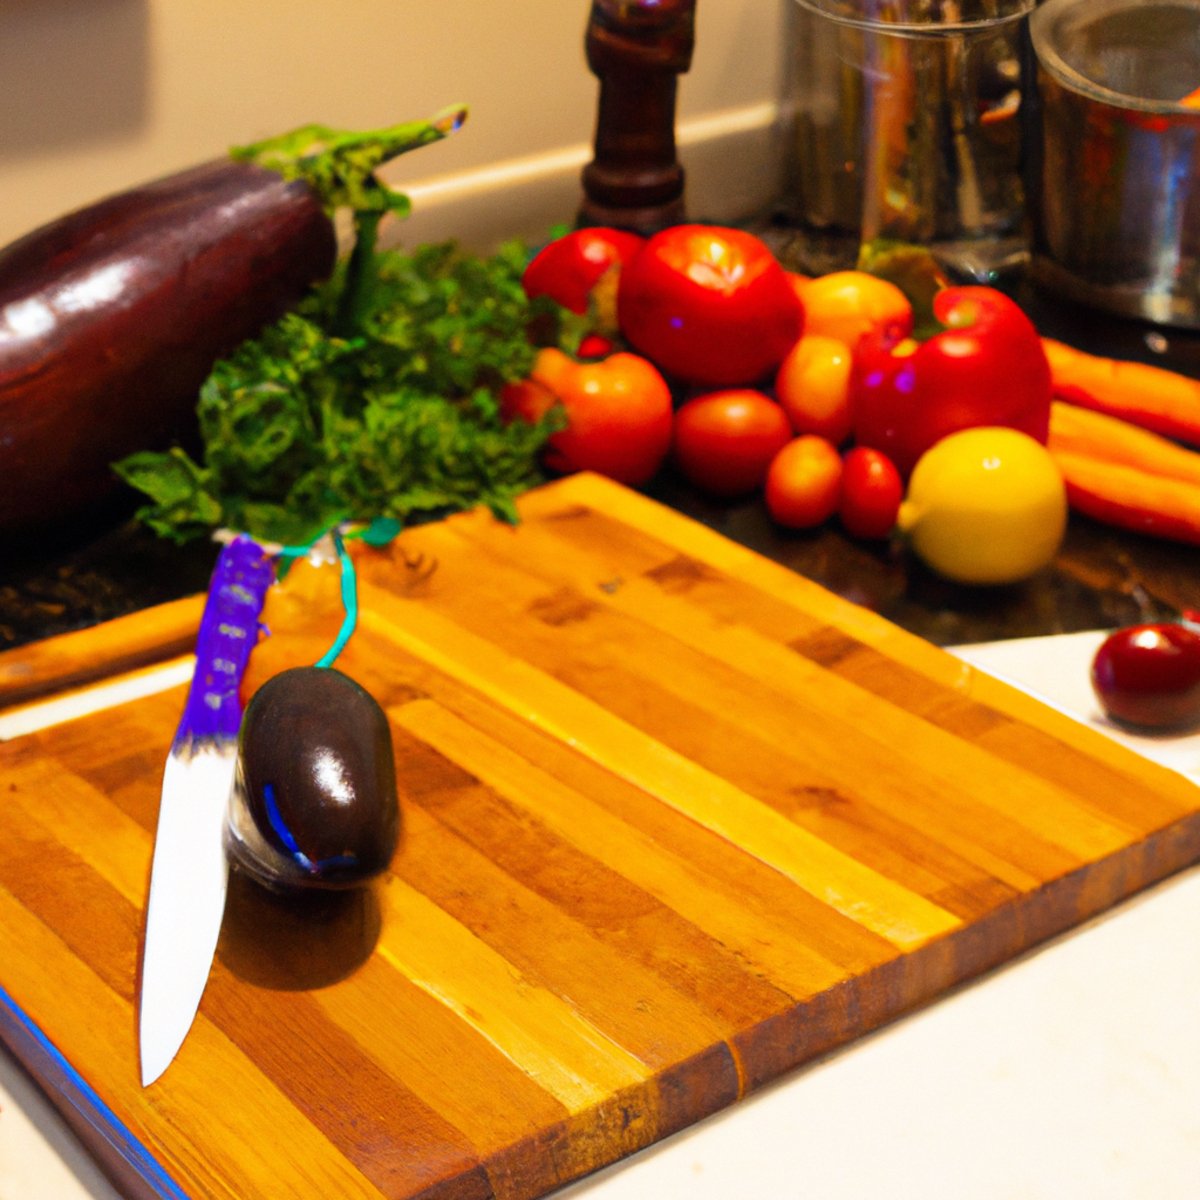 The photo features a wooden cutting board with a variety of colorful fruits and vegetables arranged neatly on top. A bright red tomato, a vibrant orange carrot, a deep purple eggplant, and a handful of leafy greens are just a few of the items on display. In the background, a few cooking utensils and a cookbook can be seen, hinting at the meal prep process. The lighting is natural and soft, highlighting the natural beauty of the produce. The overall effect is both appetizing and inspiring, encouraging readers to embrace plant-based eating for a healthier lifestyle.